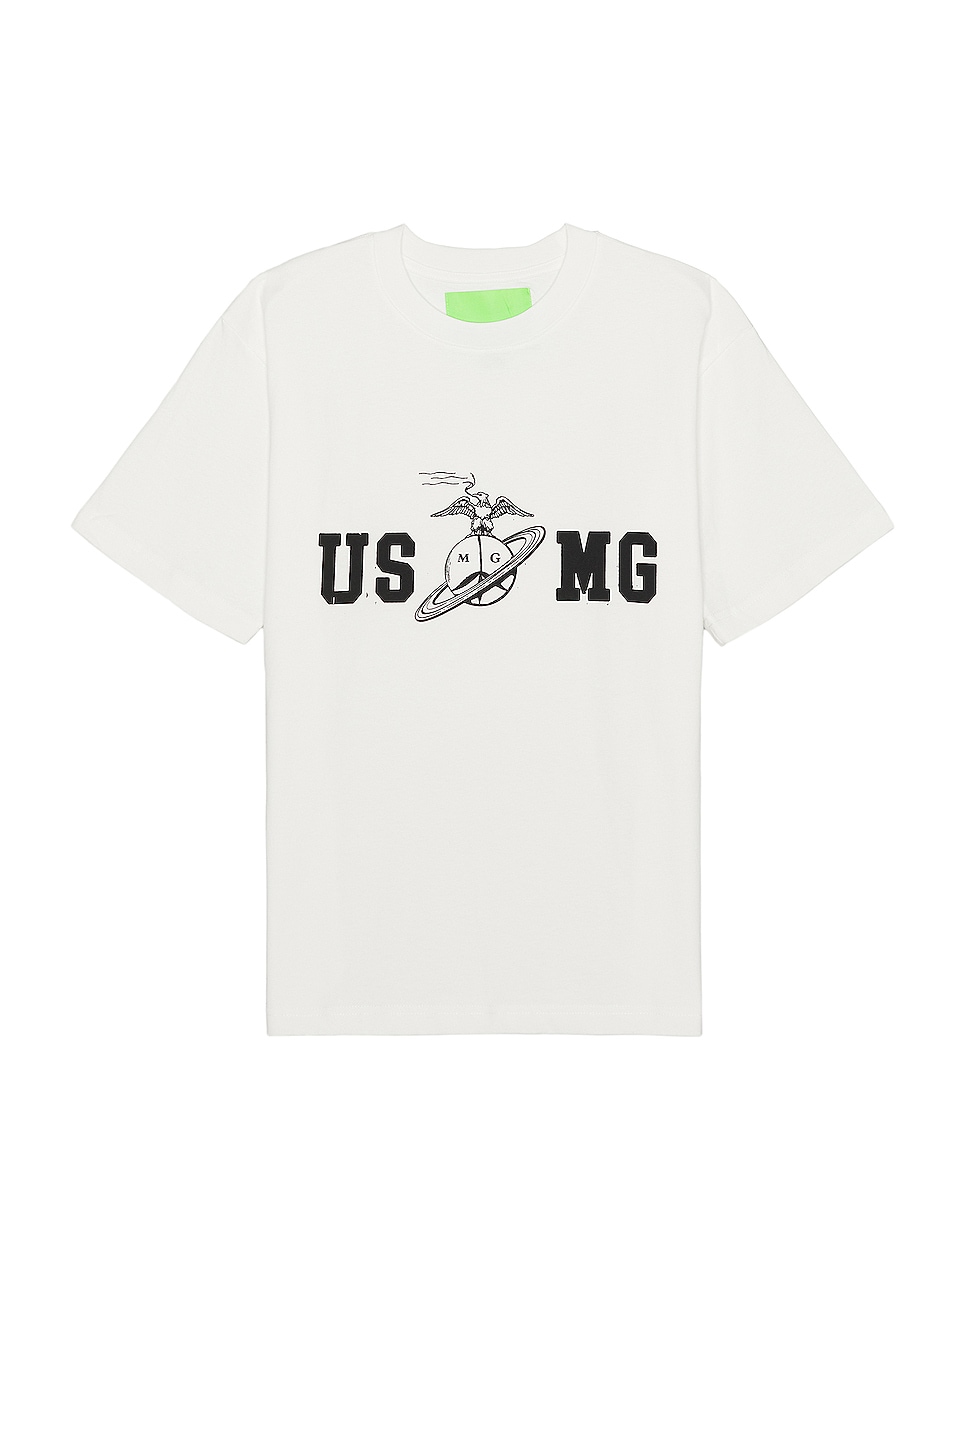 USMG Tee in White